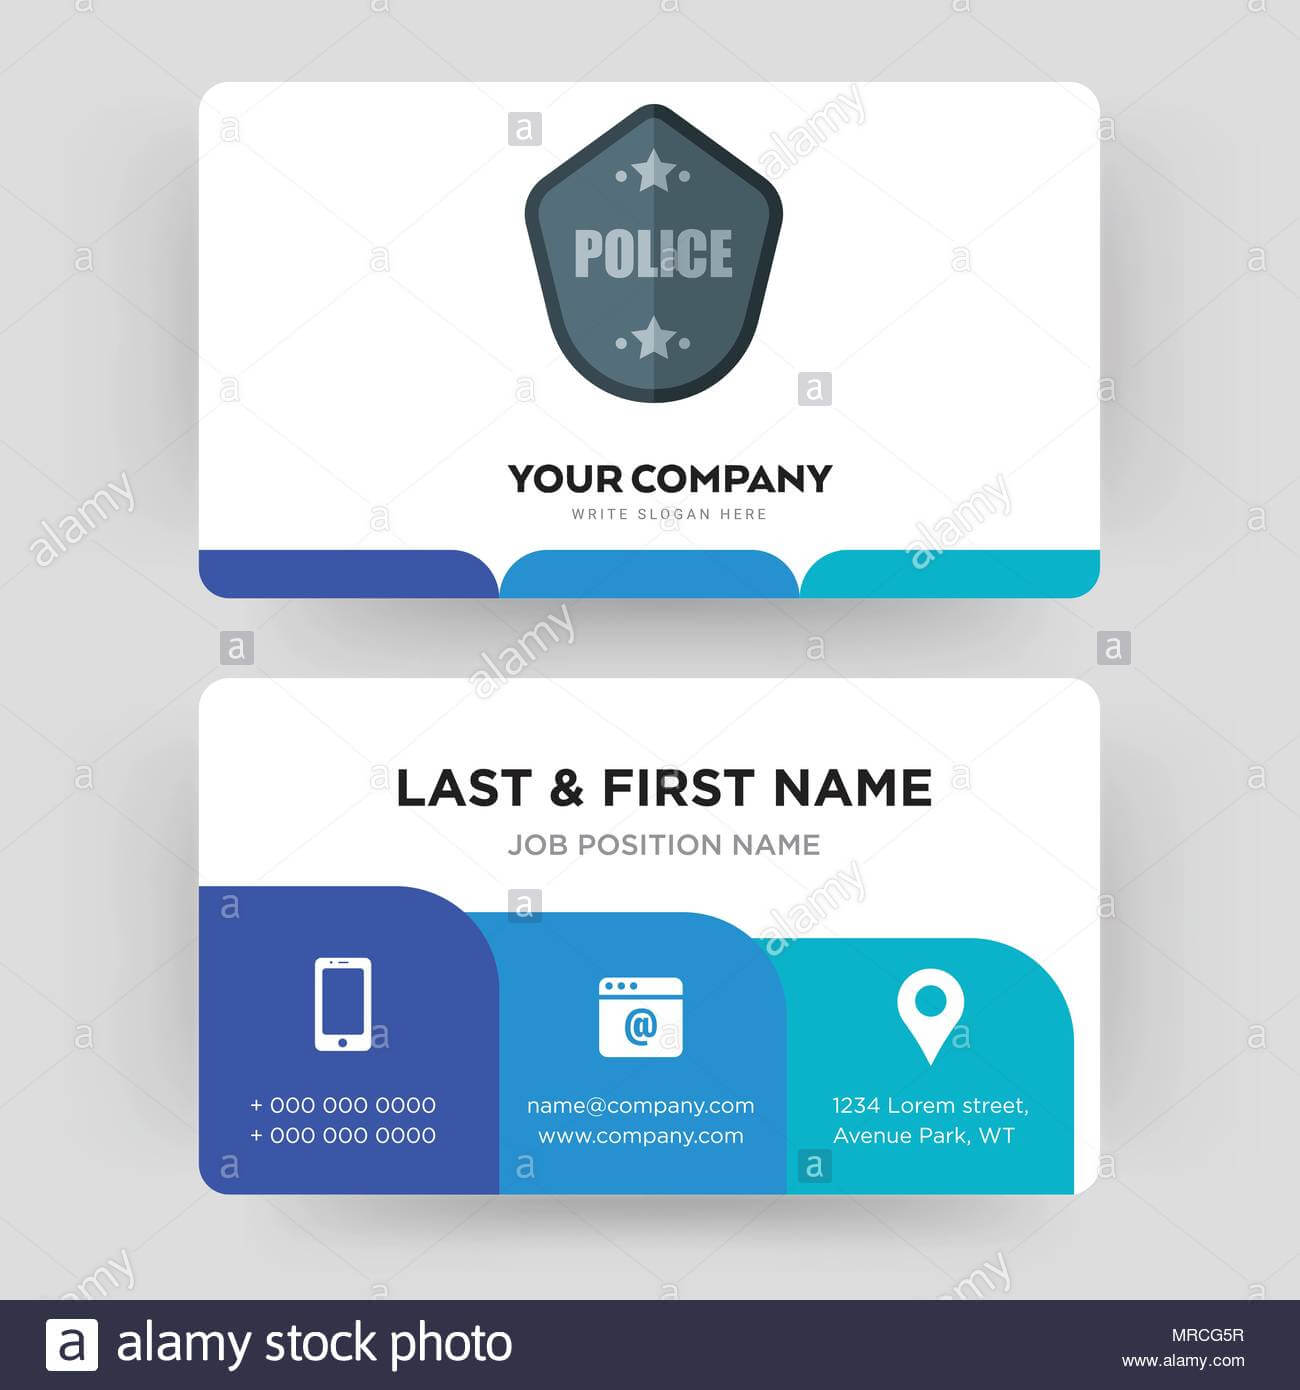 40A498 Fbi Id Card Template | Wiring Resources Intended For Mi6 Id Card Template